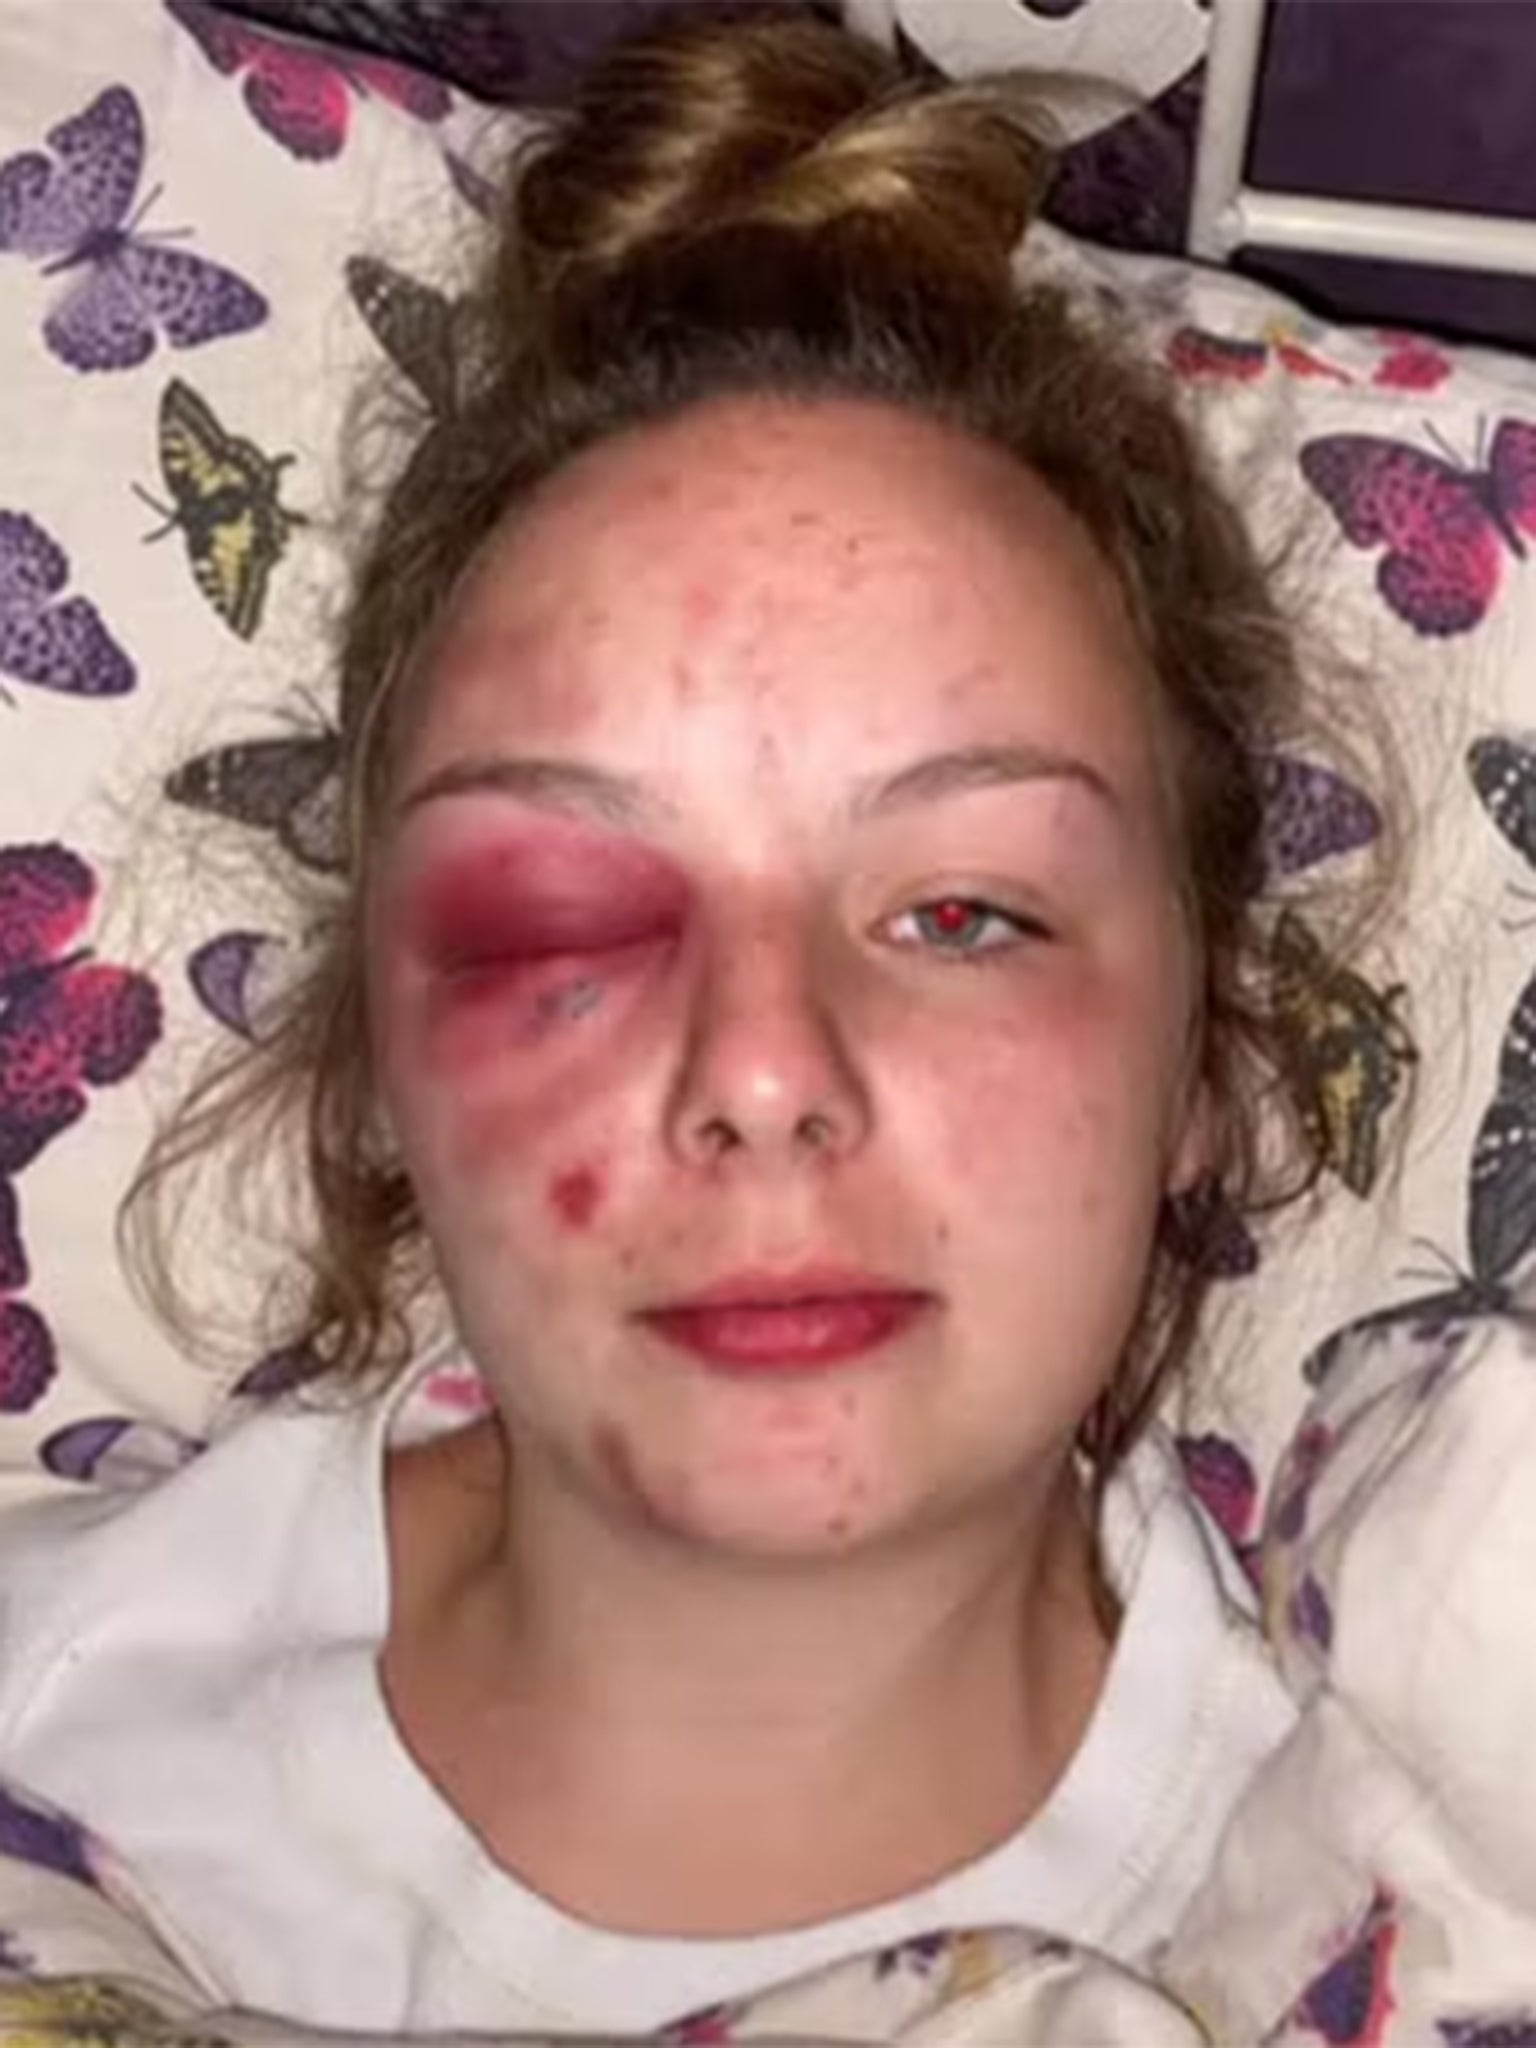 Eleanor Williams post pictures on social media of injuries she inflicted on herself